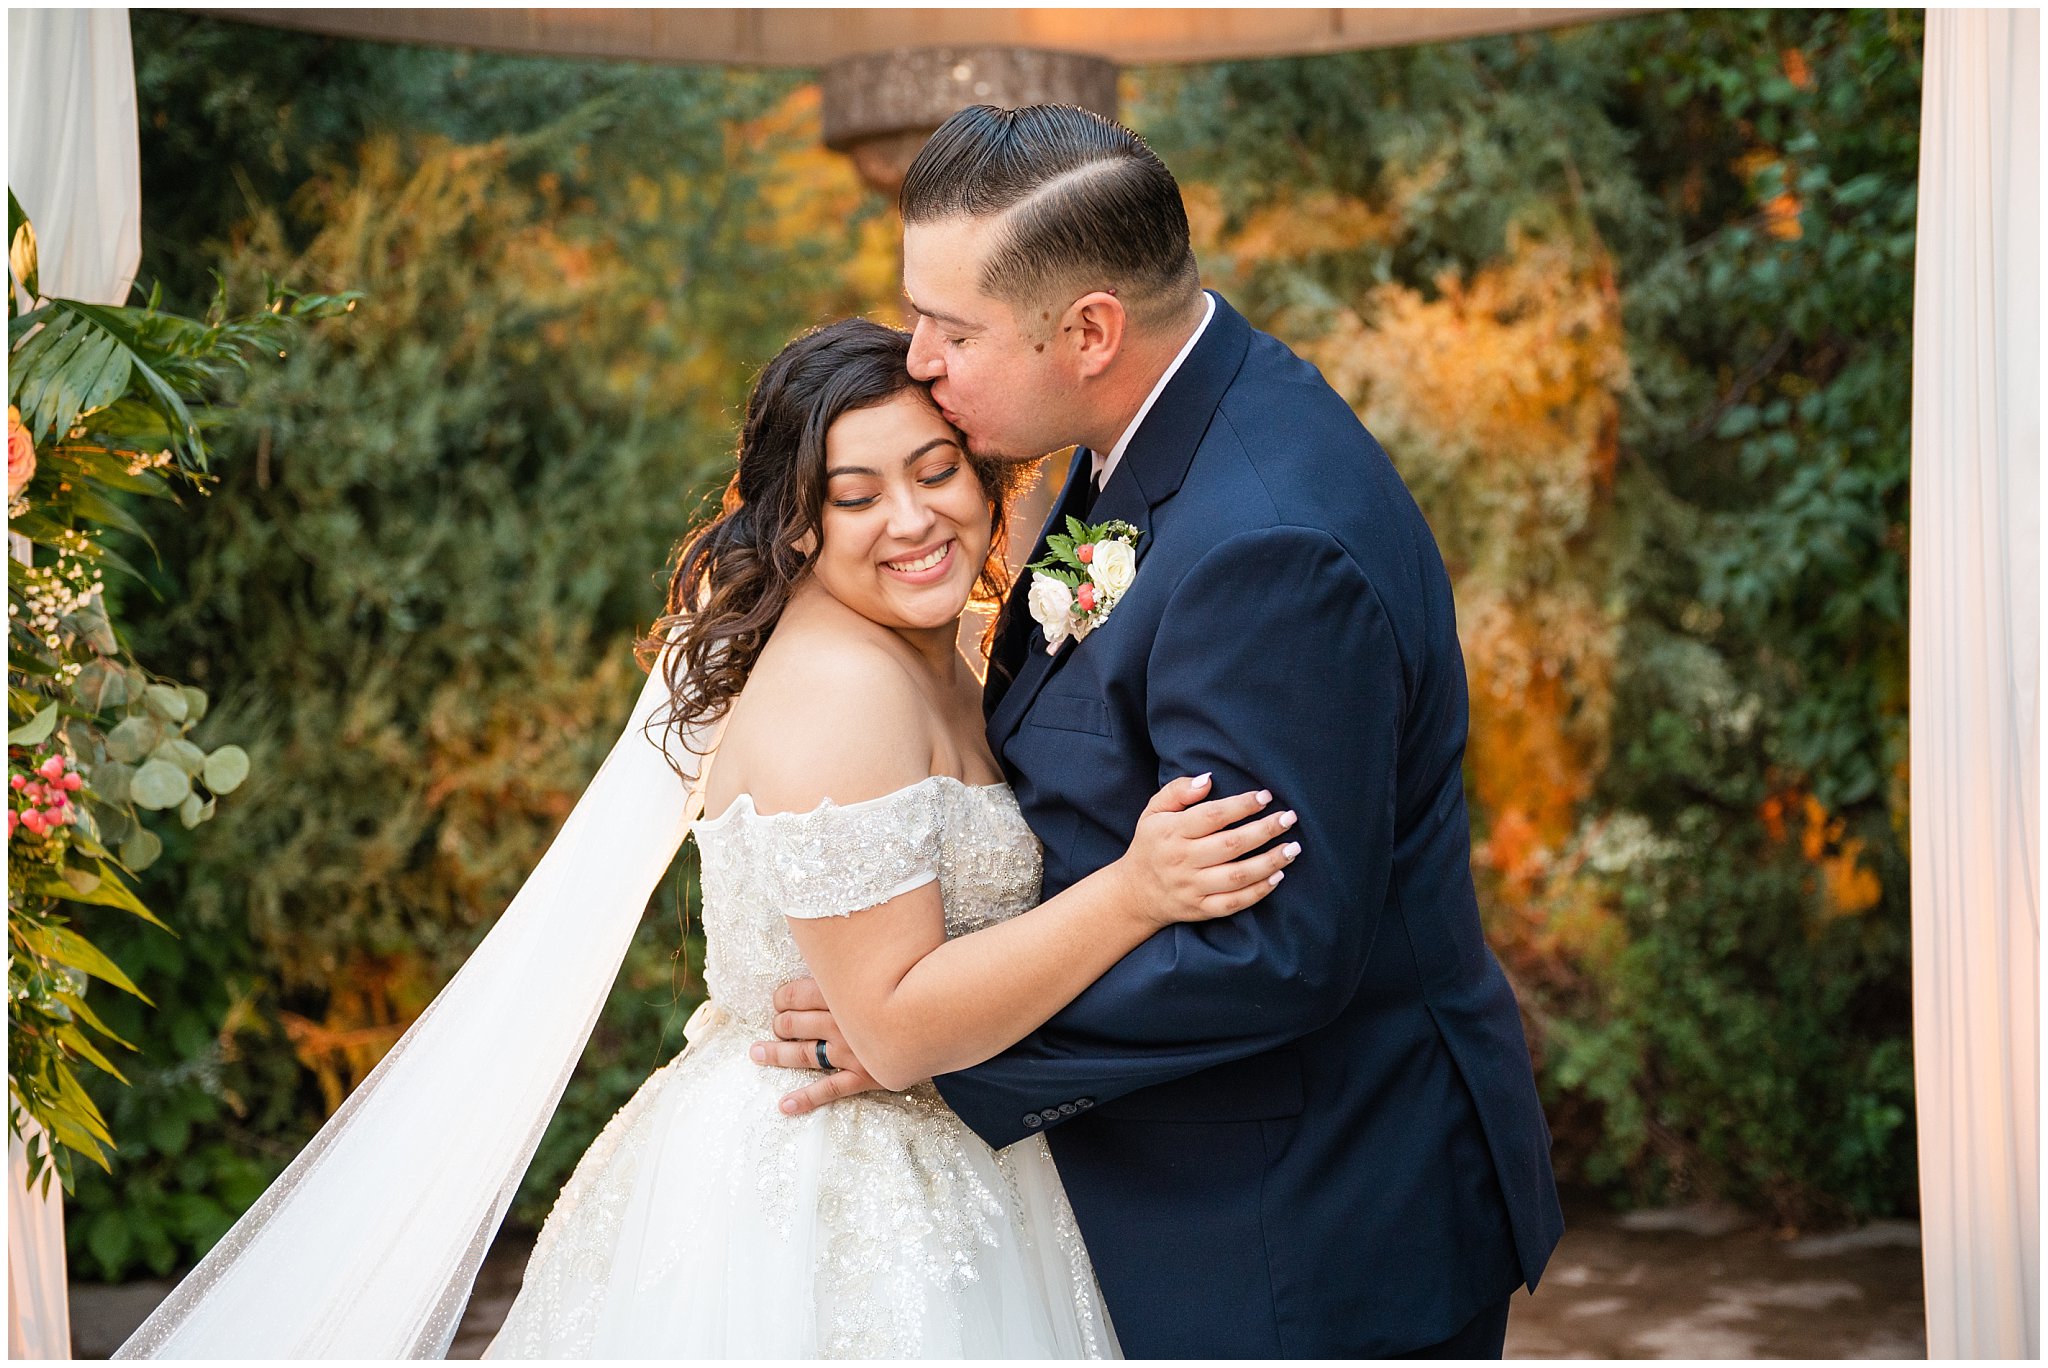 Bride and groom portraits in front of the Utah mountains with bride wearing long princess dress and long veil | Rustic Mountain Destination Wedding at Oak Hills Utah | Jessie and Dallin Photography